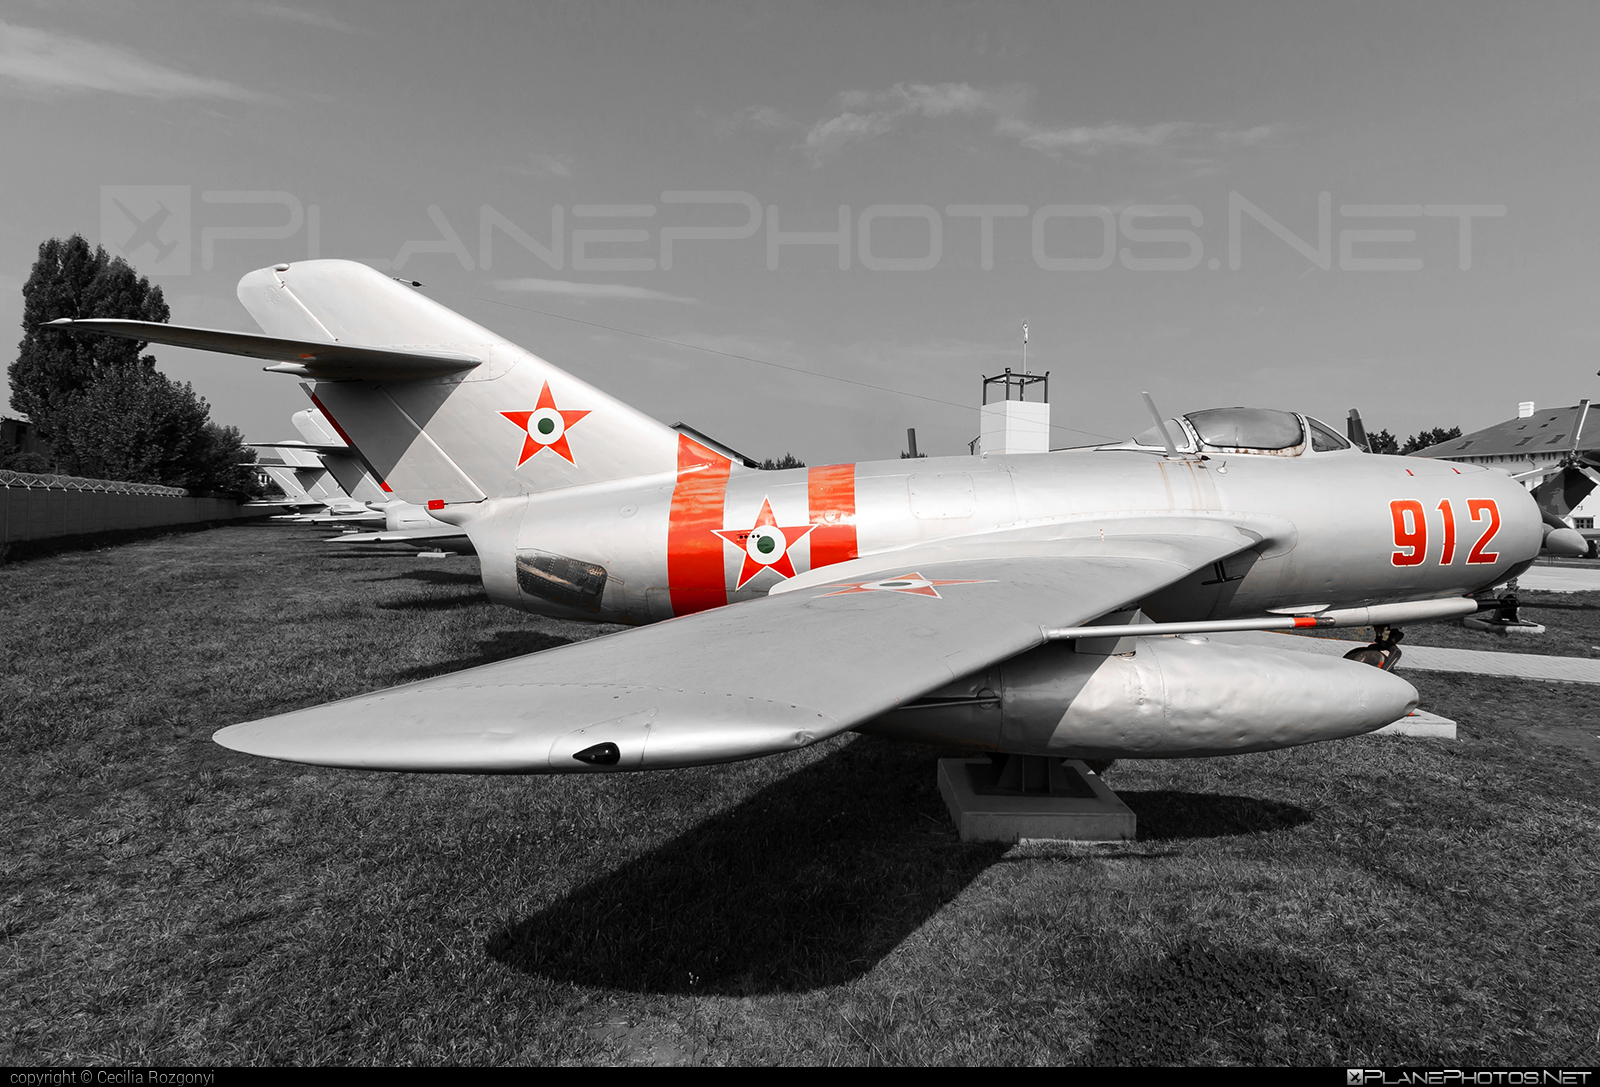 Mikoyan-Gurevich MiG-15bis - 912 operated by Magyar Néphadsereg (Hungarian People's Army) #hungarianpeoplesarmy #magyarnephadsereg #mig #mig15 #mig15bis #mikoyangurevich